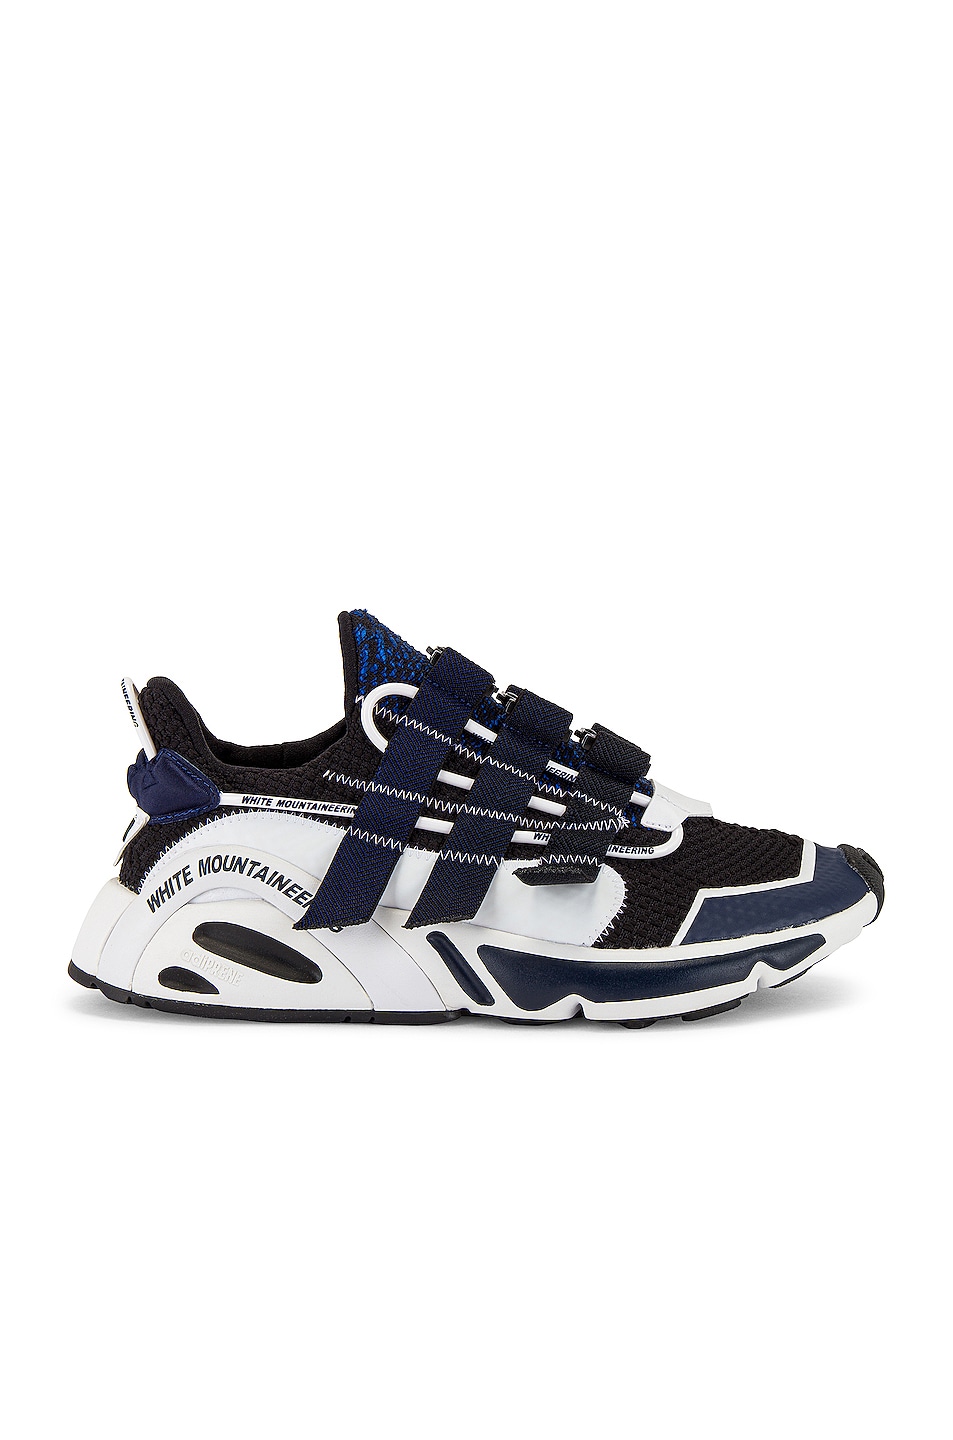 Image 1 of White Mountaineering x adidas Originals LX Con in Navy